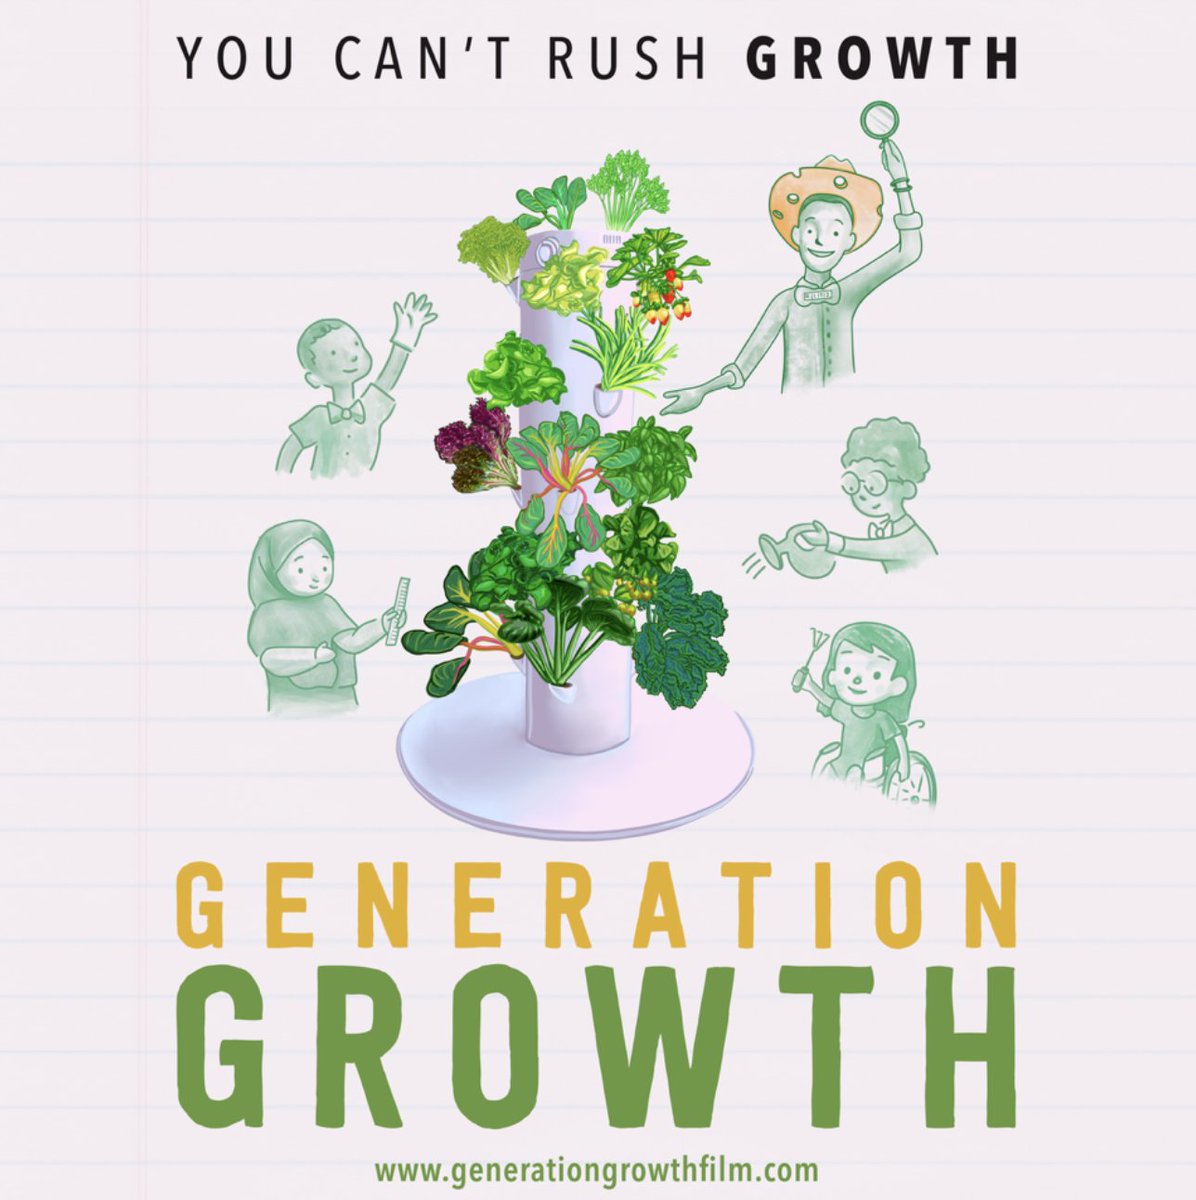 Free virtual event April 23 at 7pm EST with Senior Fellow @StephenRitz! Let's CULTIVATING FUTURE LEADERS THROUGH EDUCATION AND HEALTH together! Register: generationgrowthday.splashthat.com/?utm_source=im…